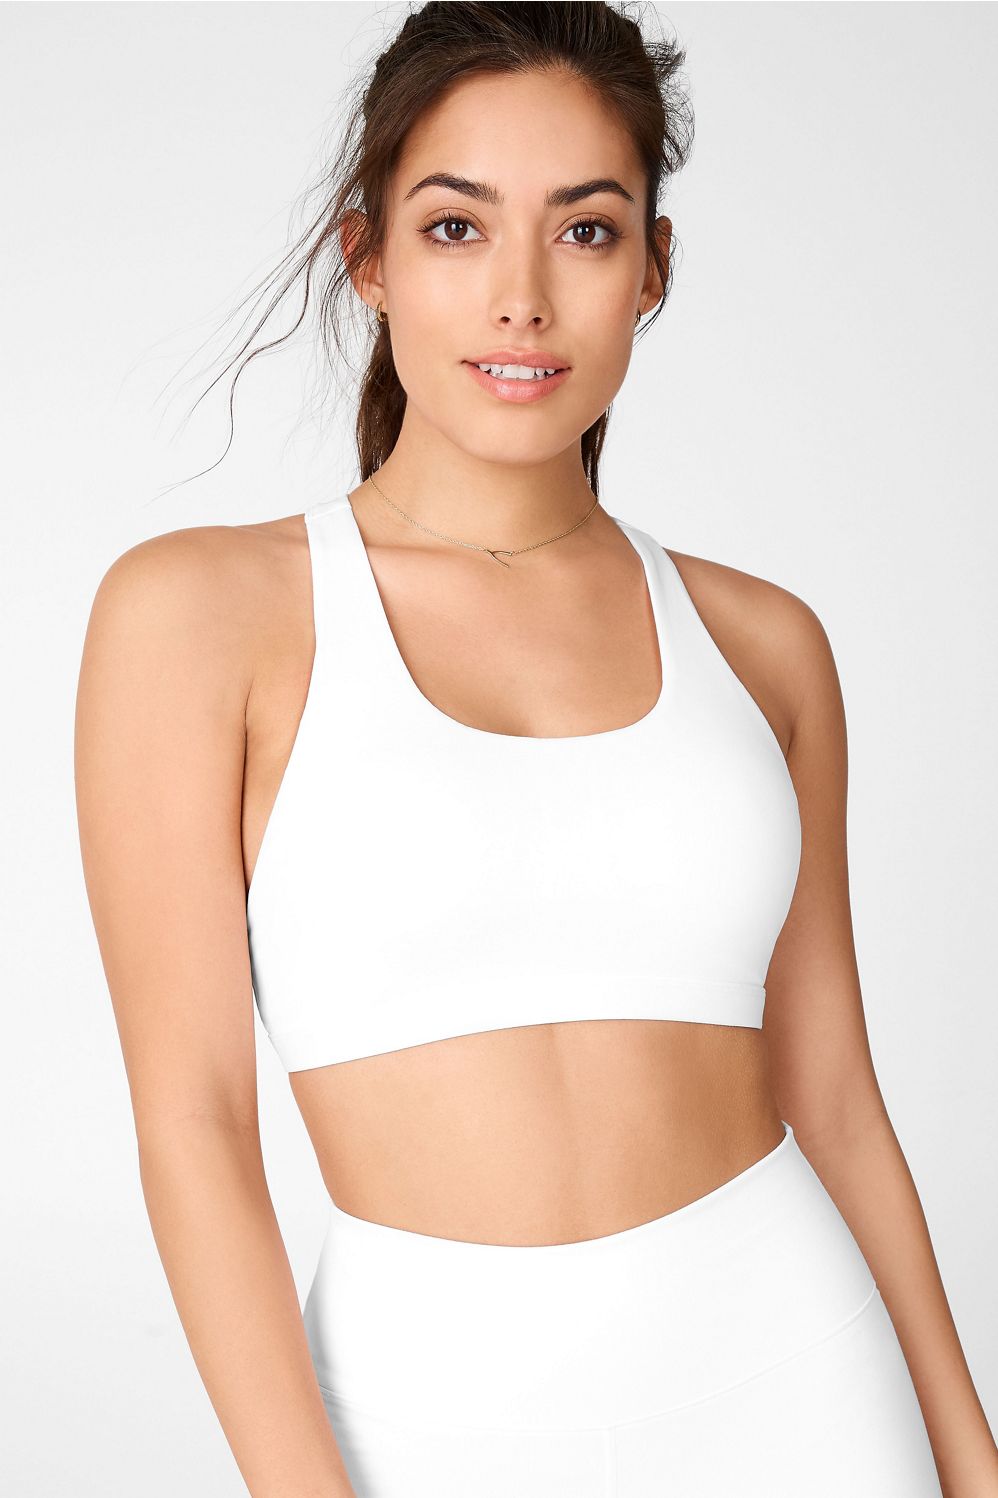 Fabletics Aza Medium Impact Sports Bra Size M. “Excellent” Features  Adjustable Removable cups Fabric & Care 81% Nylon/19% Elastane Imported  Black - $30 - From BZ